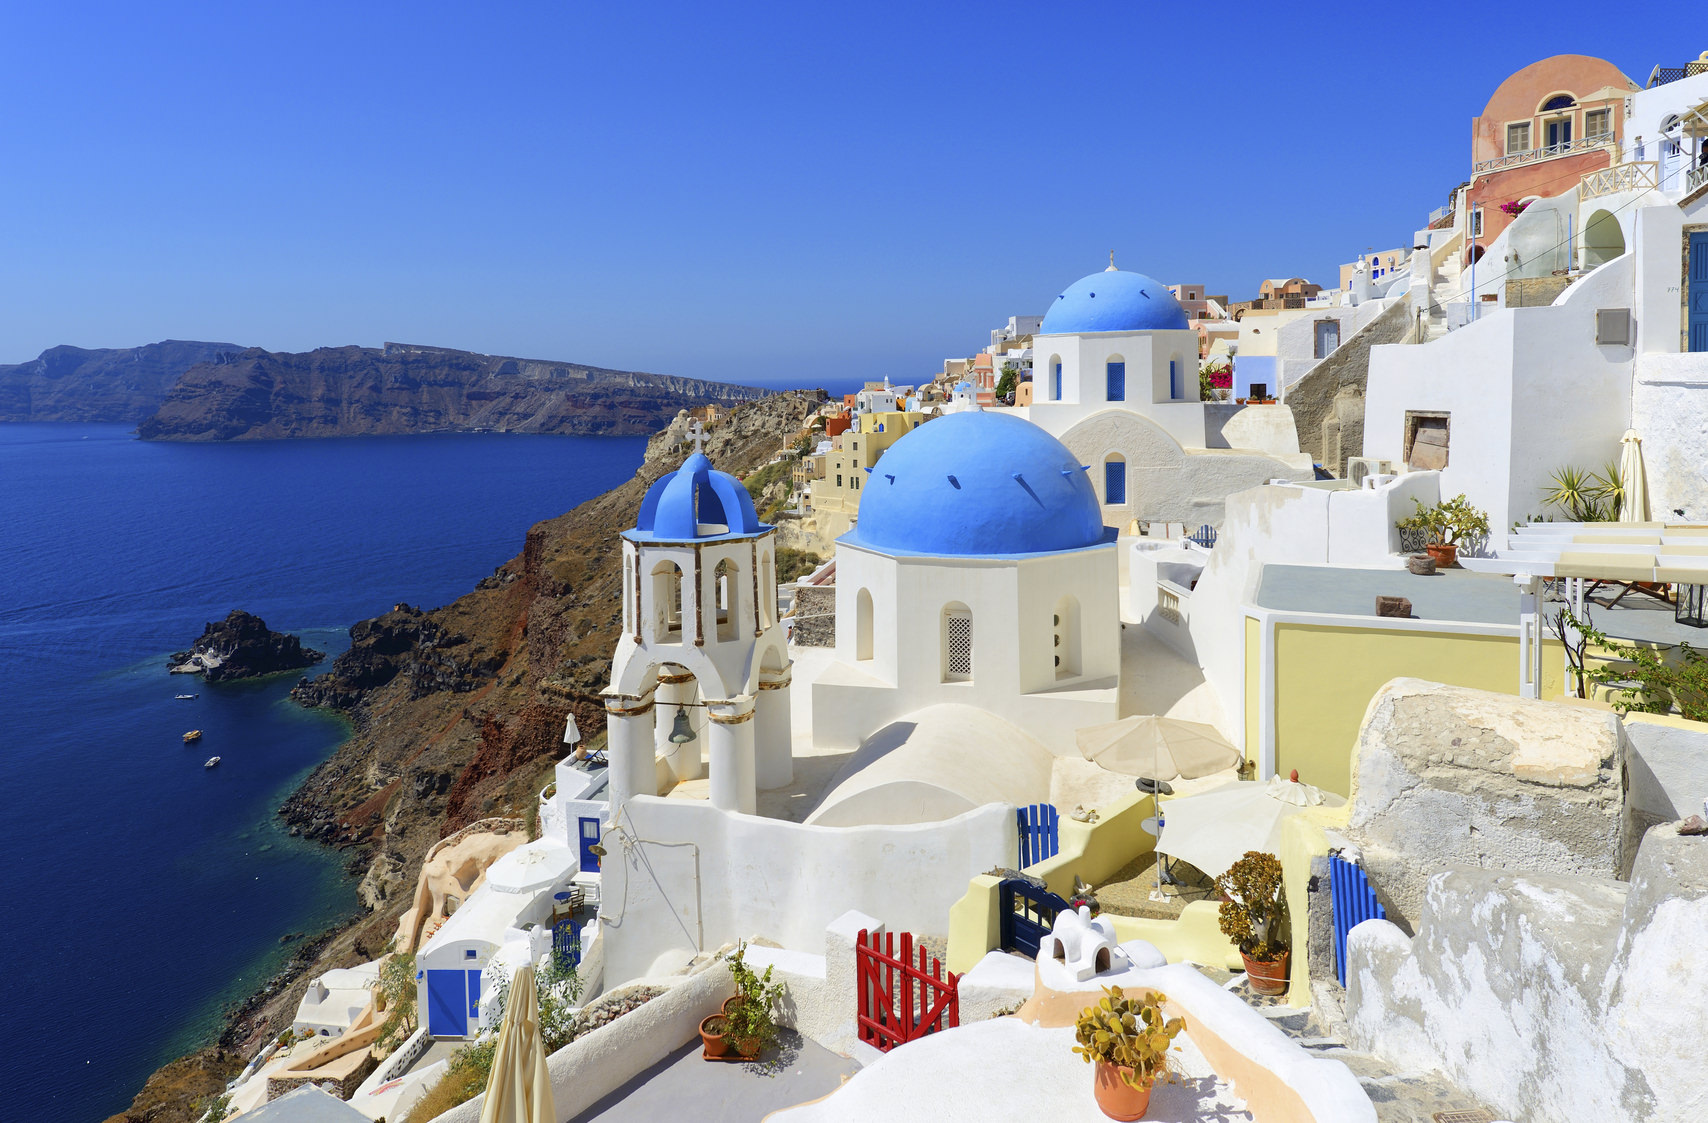 What to Do in Oia, Santorini